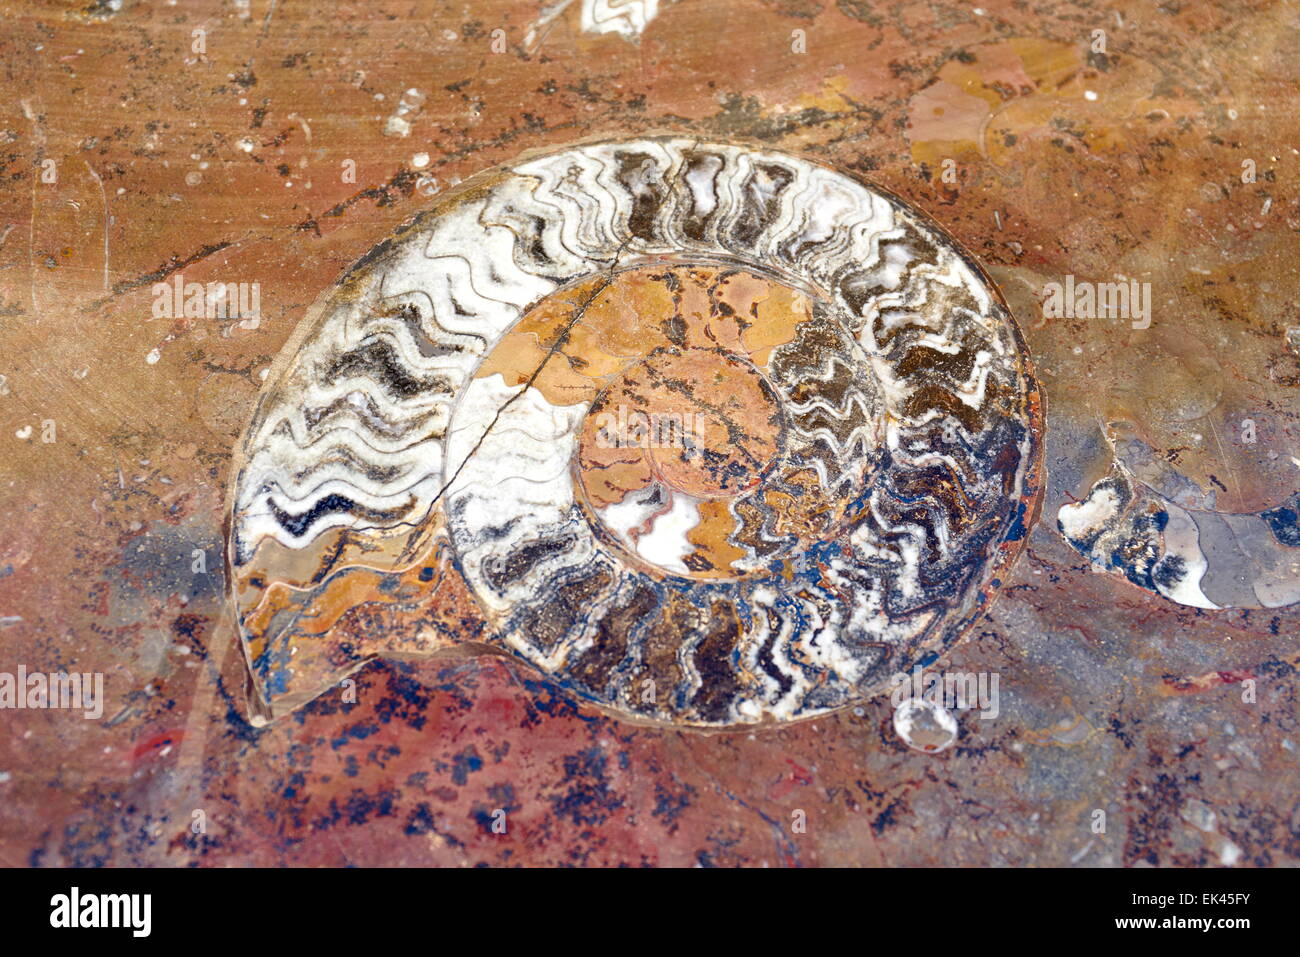 Polished rock of ammonite spiral shells, Morocco, Africa Stock Photo